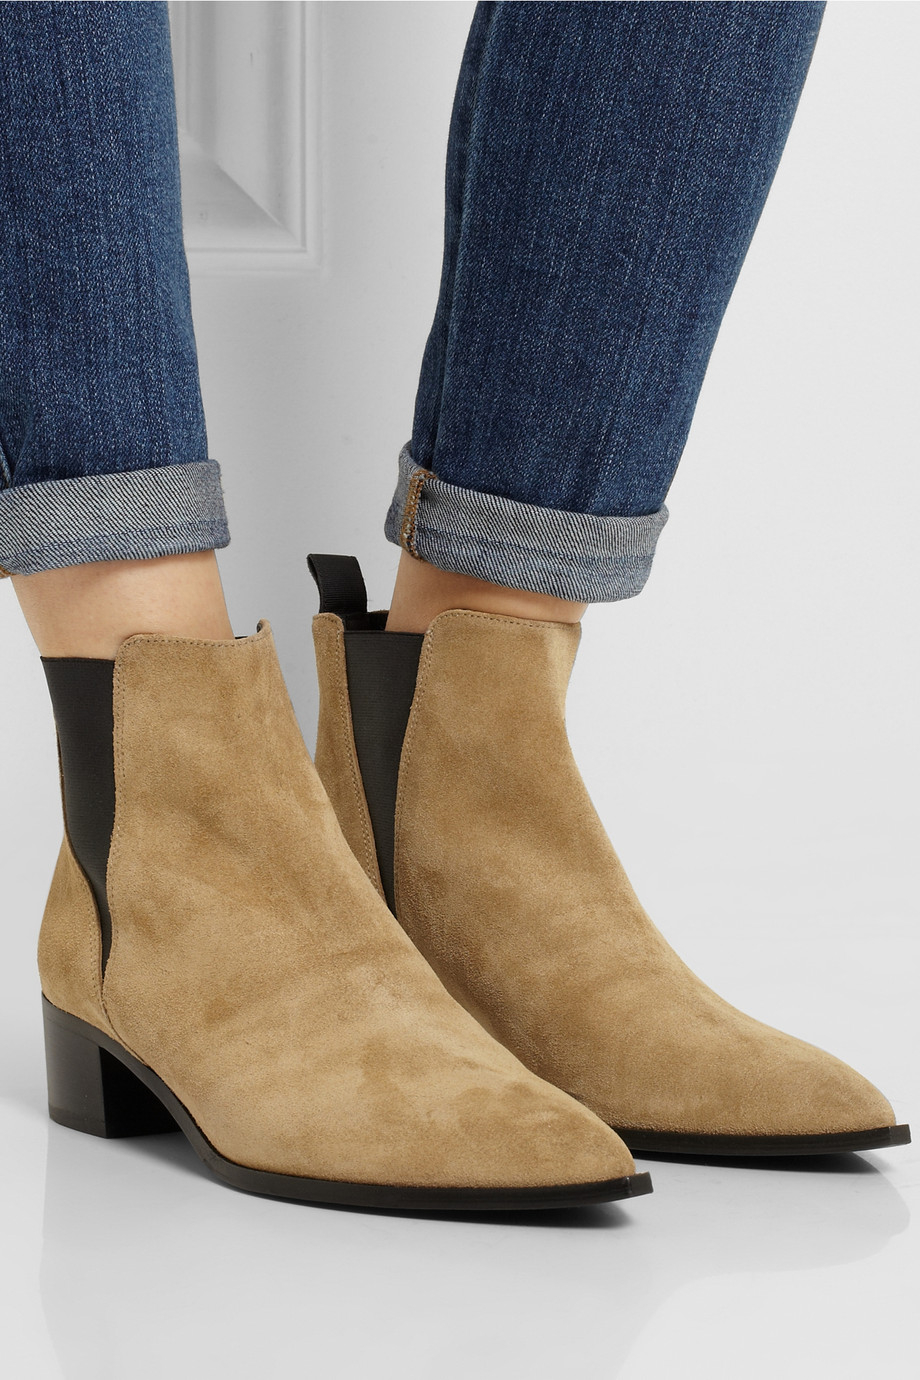 Lyst - Acne Studios Jensen Suede Ankle Boots in Brown